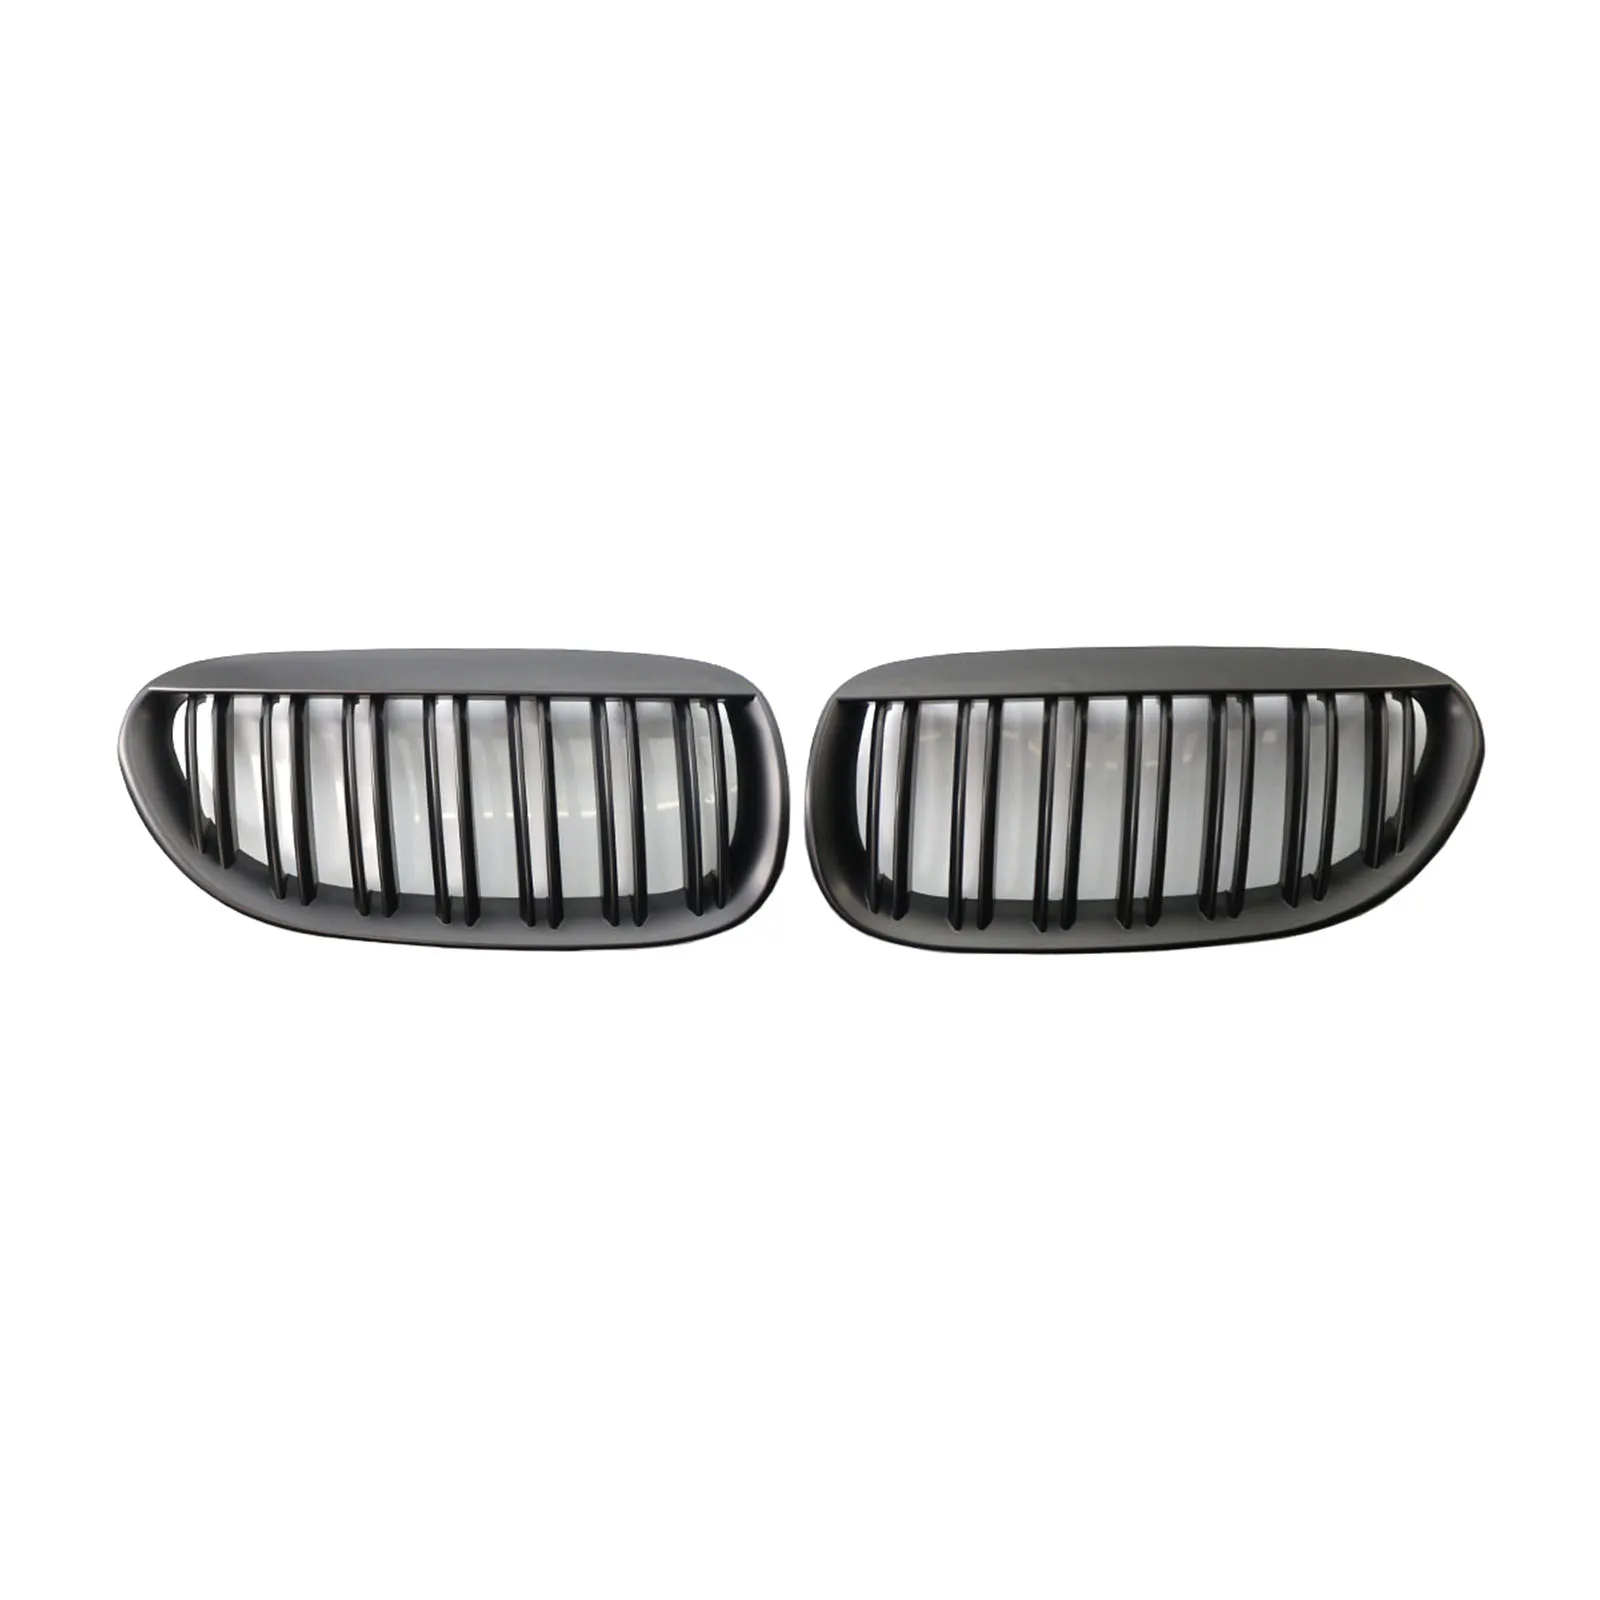 Black Double Slats Front Kidney Grille Mesh Grill Replaces for  E63